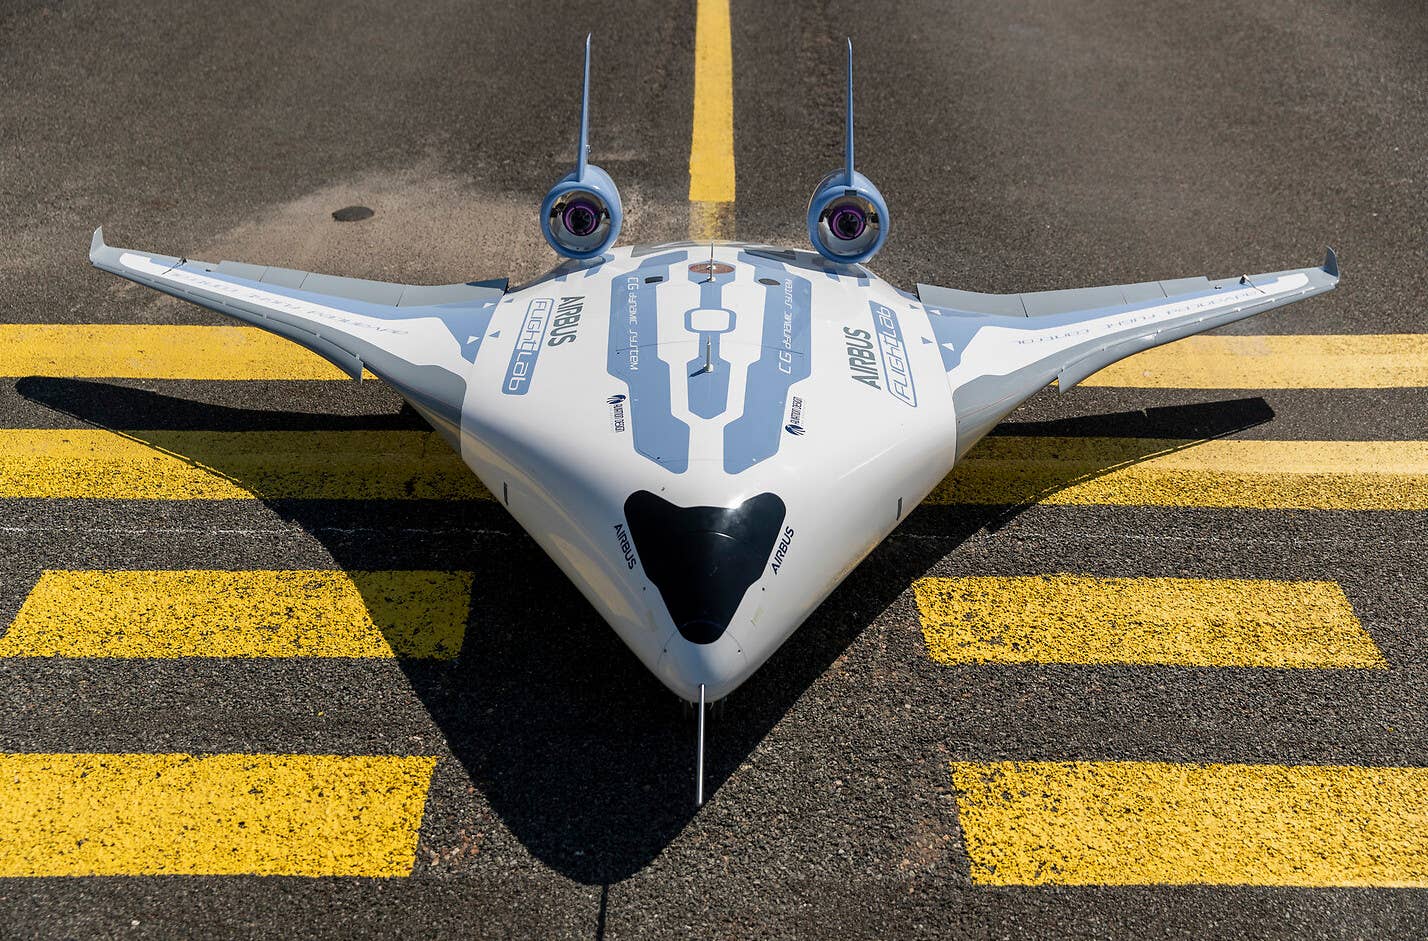 Intended to inform future airliner development, Airbus revealed its MAVERIC (Model Aircraft for Validation and Experimentation of Robust Innovative Controls) blended wing body scale model technological demonstrator in 2020. <em>Airbus</em>